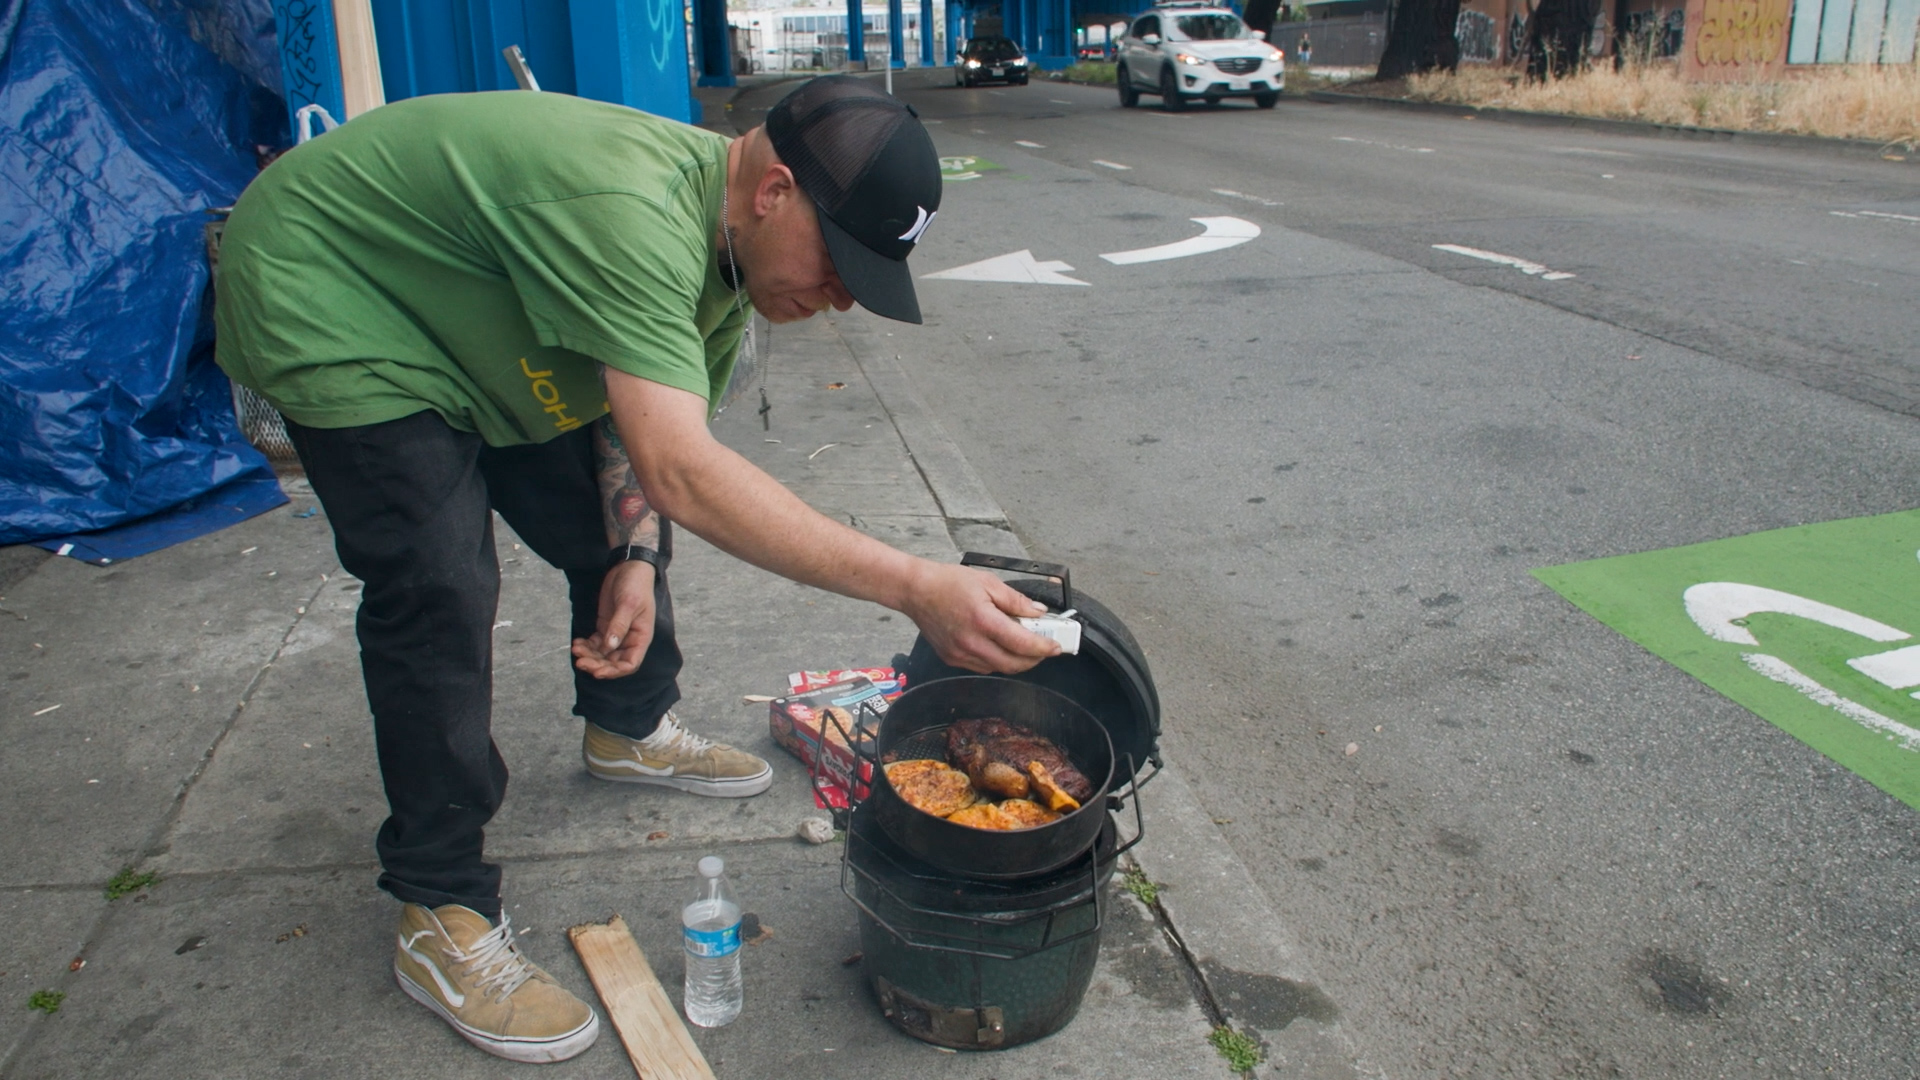 A man sprinkles salt as he cooks food outdoors on a small grill along a sidewalk next to a street under a freeway overpass.